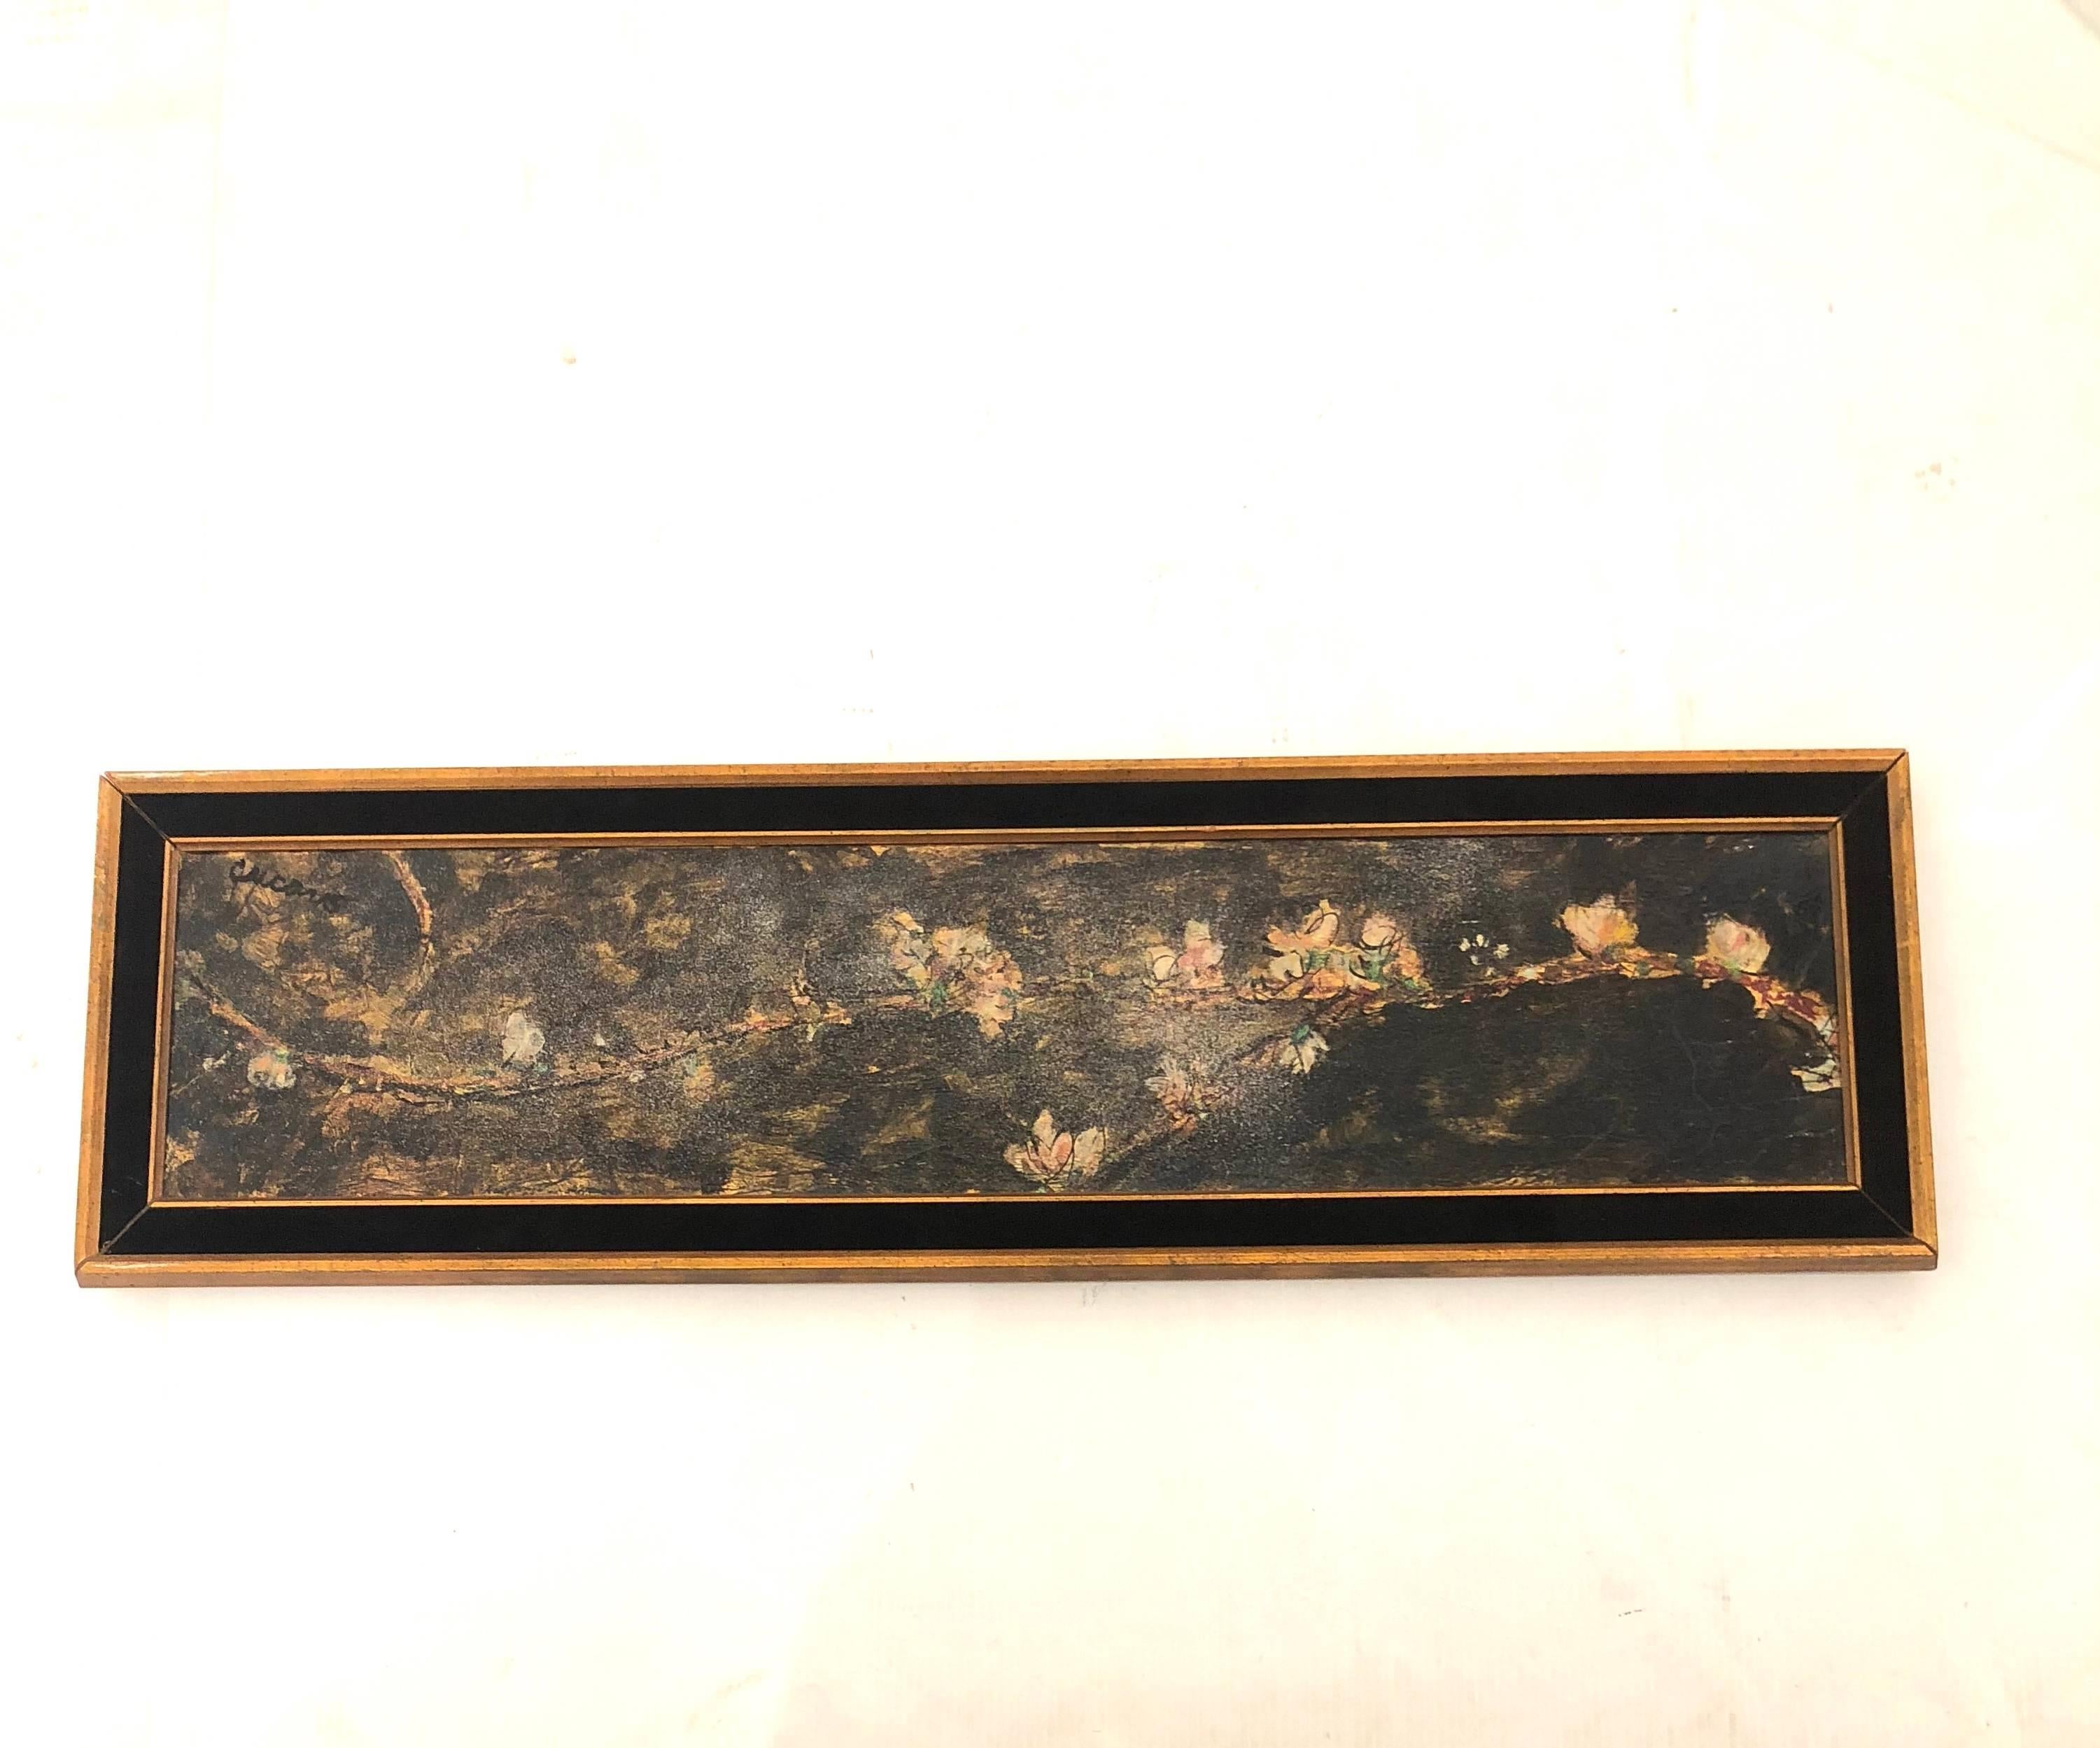 Beautiful original floral scene ,oil on canvas signed by Pascal Cucaro, California listed artist from San Francisco, original gold frame , can be hang horizontal or vertical.